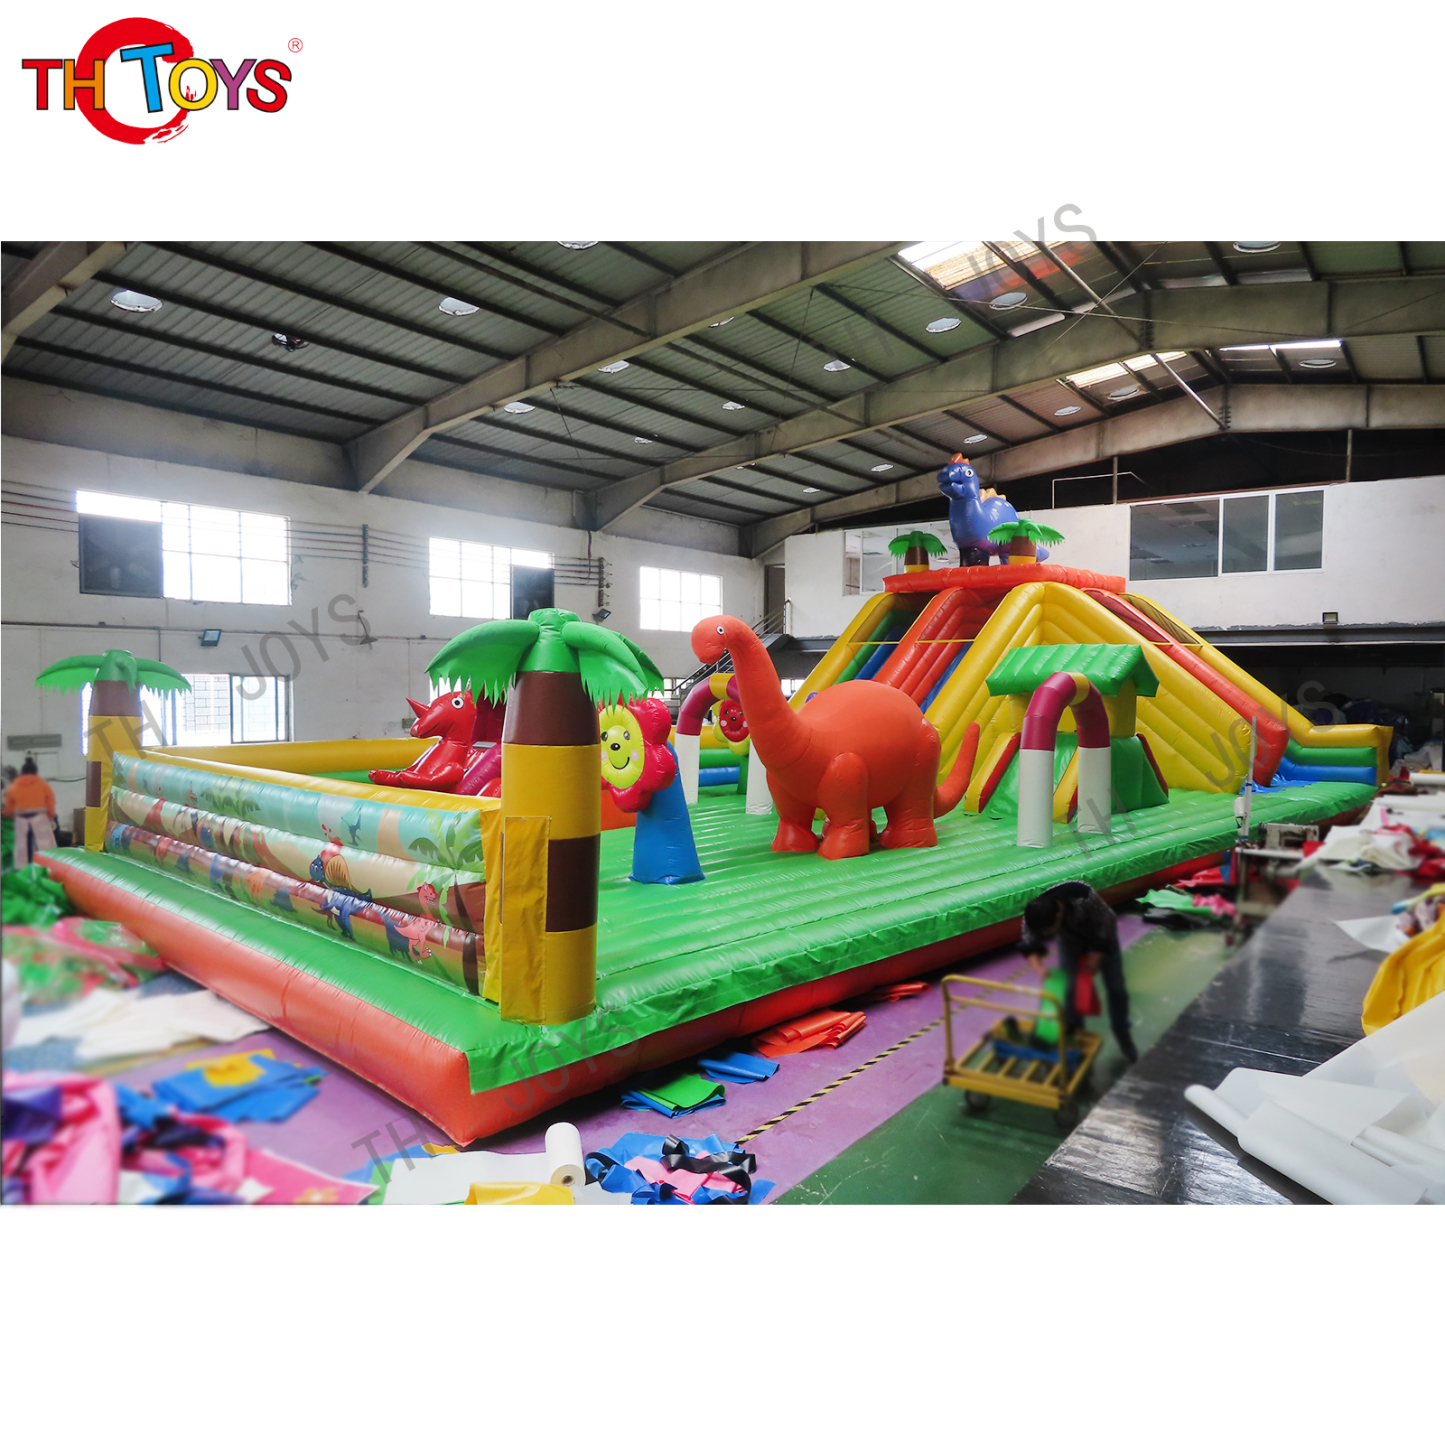 Inflatable Bouncer -62